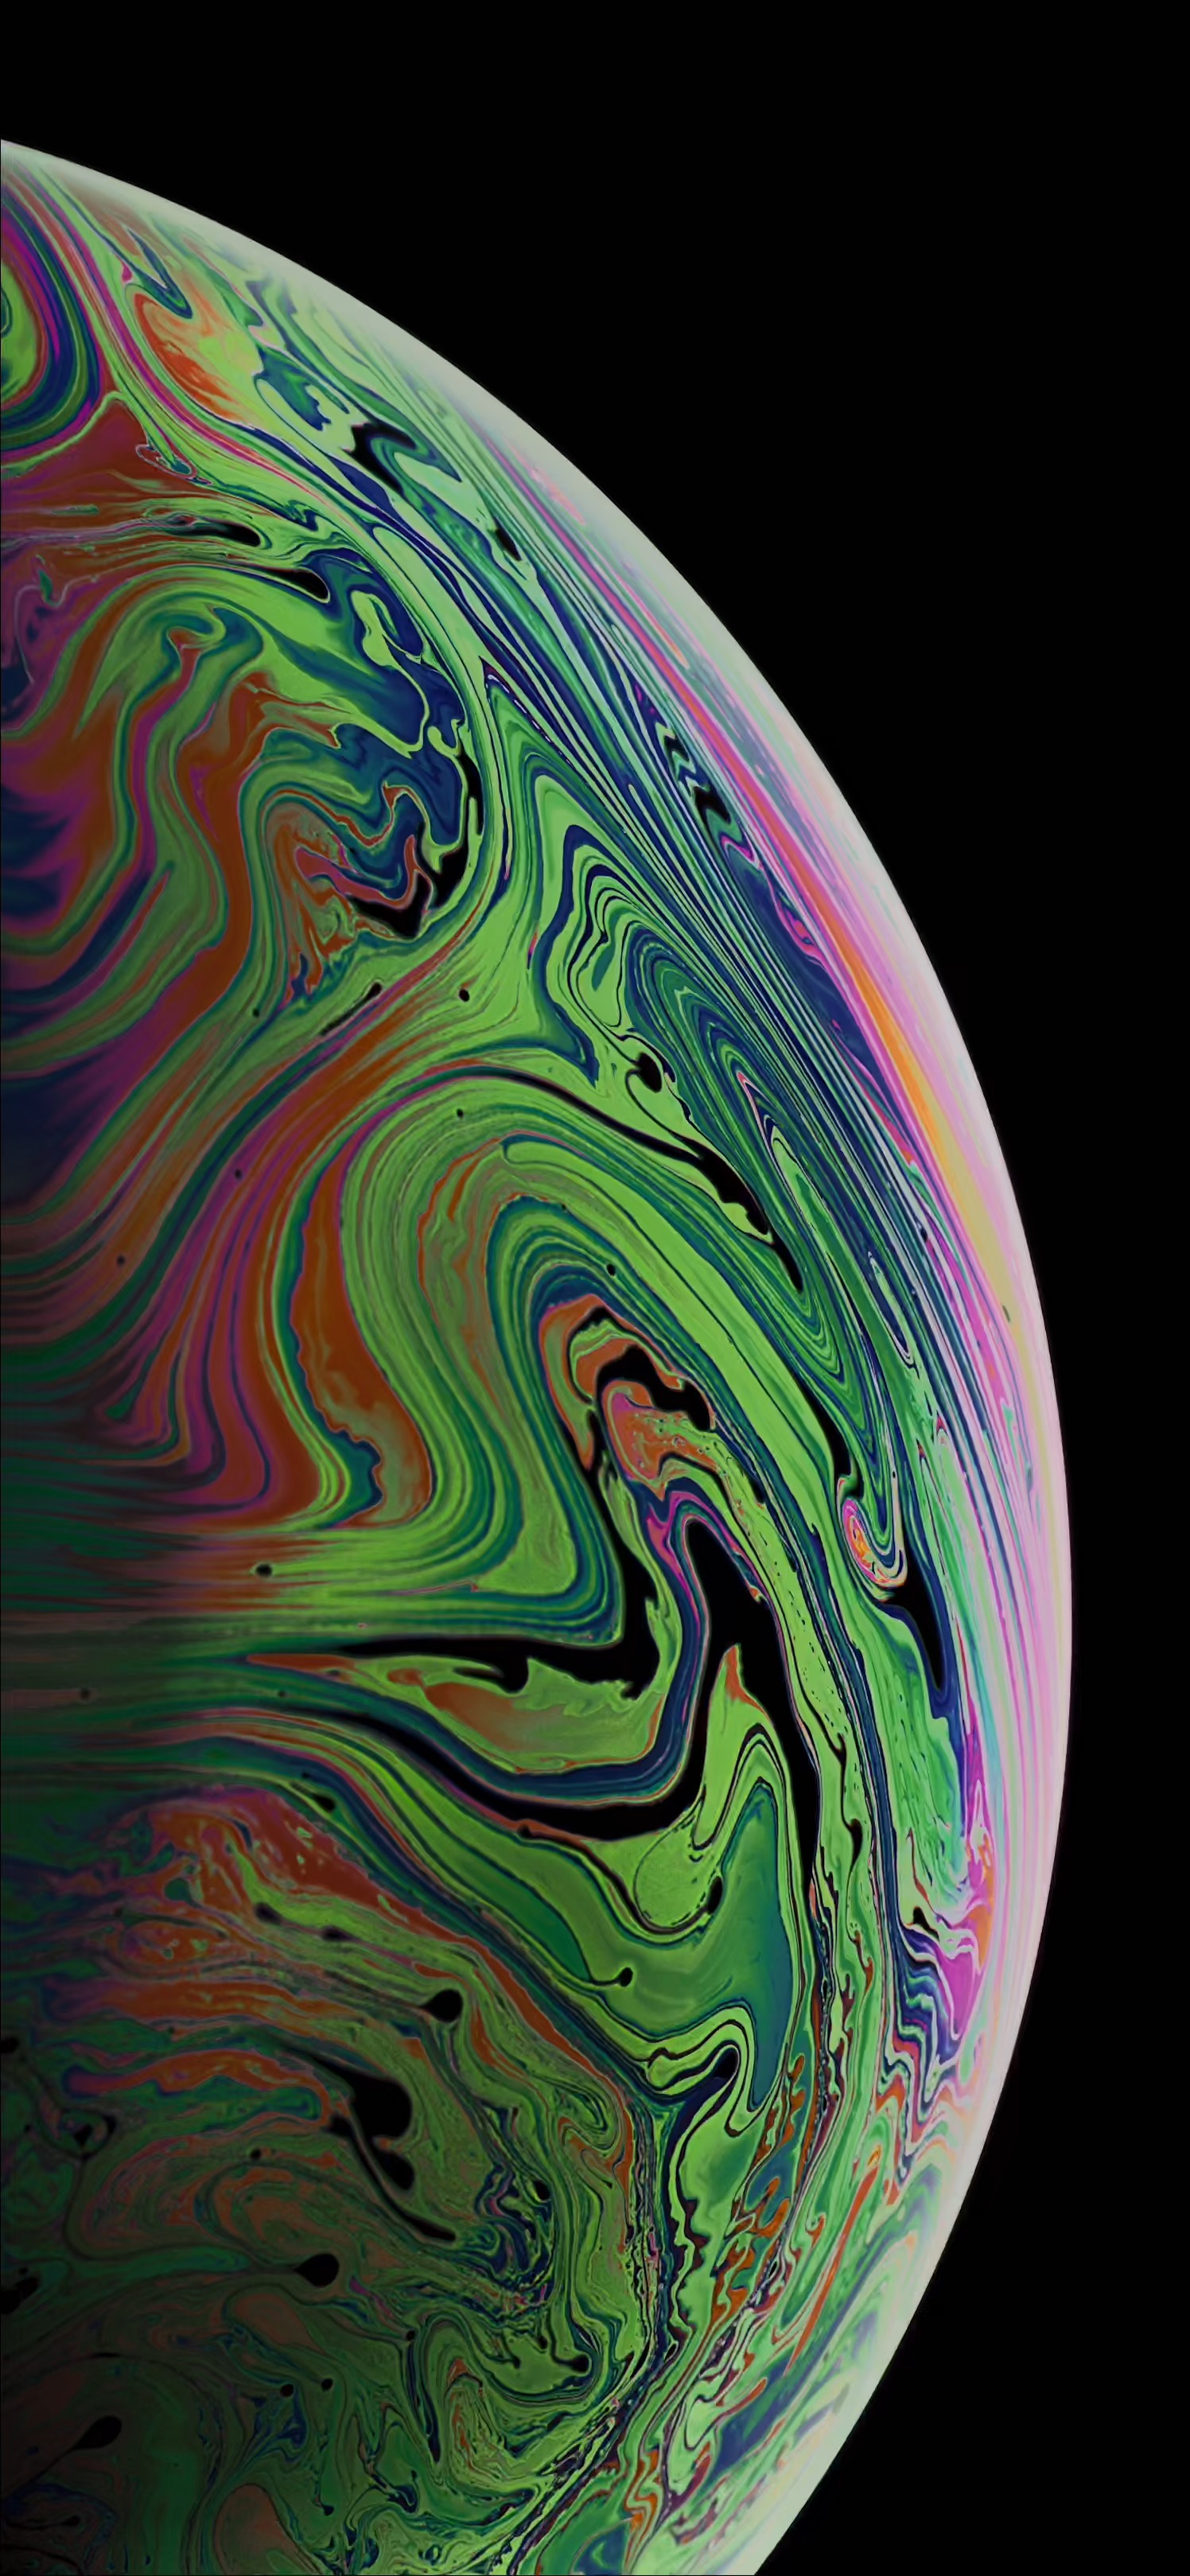 The iPhone Xs Max Wallpaper Of Bubbles